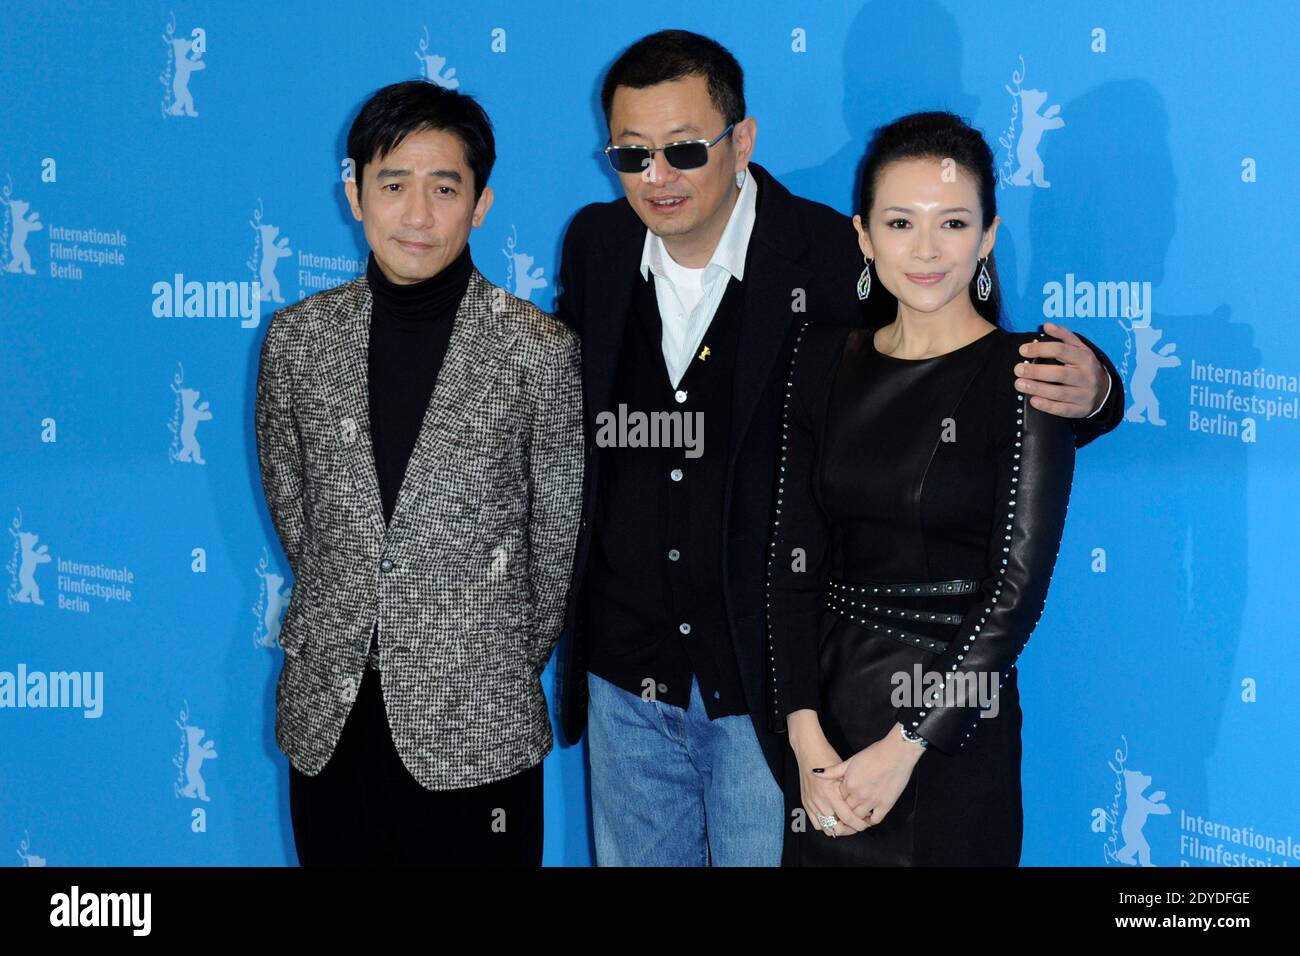 Actor Tony Leung Chiu Wa, director Wong Kar Wai and chinese actress Ziyi Zhang attending the photocall for 'The Grandmaster' ('Yi dai zong shi') photocall during the 63rd Berlinale Berlin International Film Festival in Berlin, Germany on February 7, 2013. Photo by Aurore Marechal/ABACAPRESS.COM Stock Photo